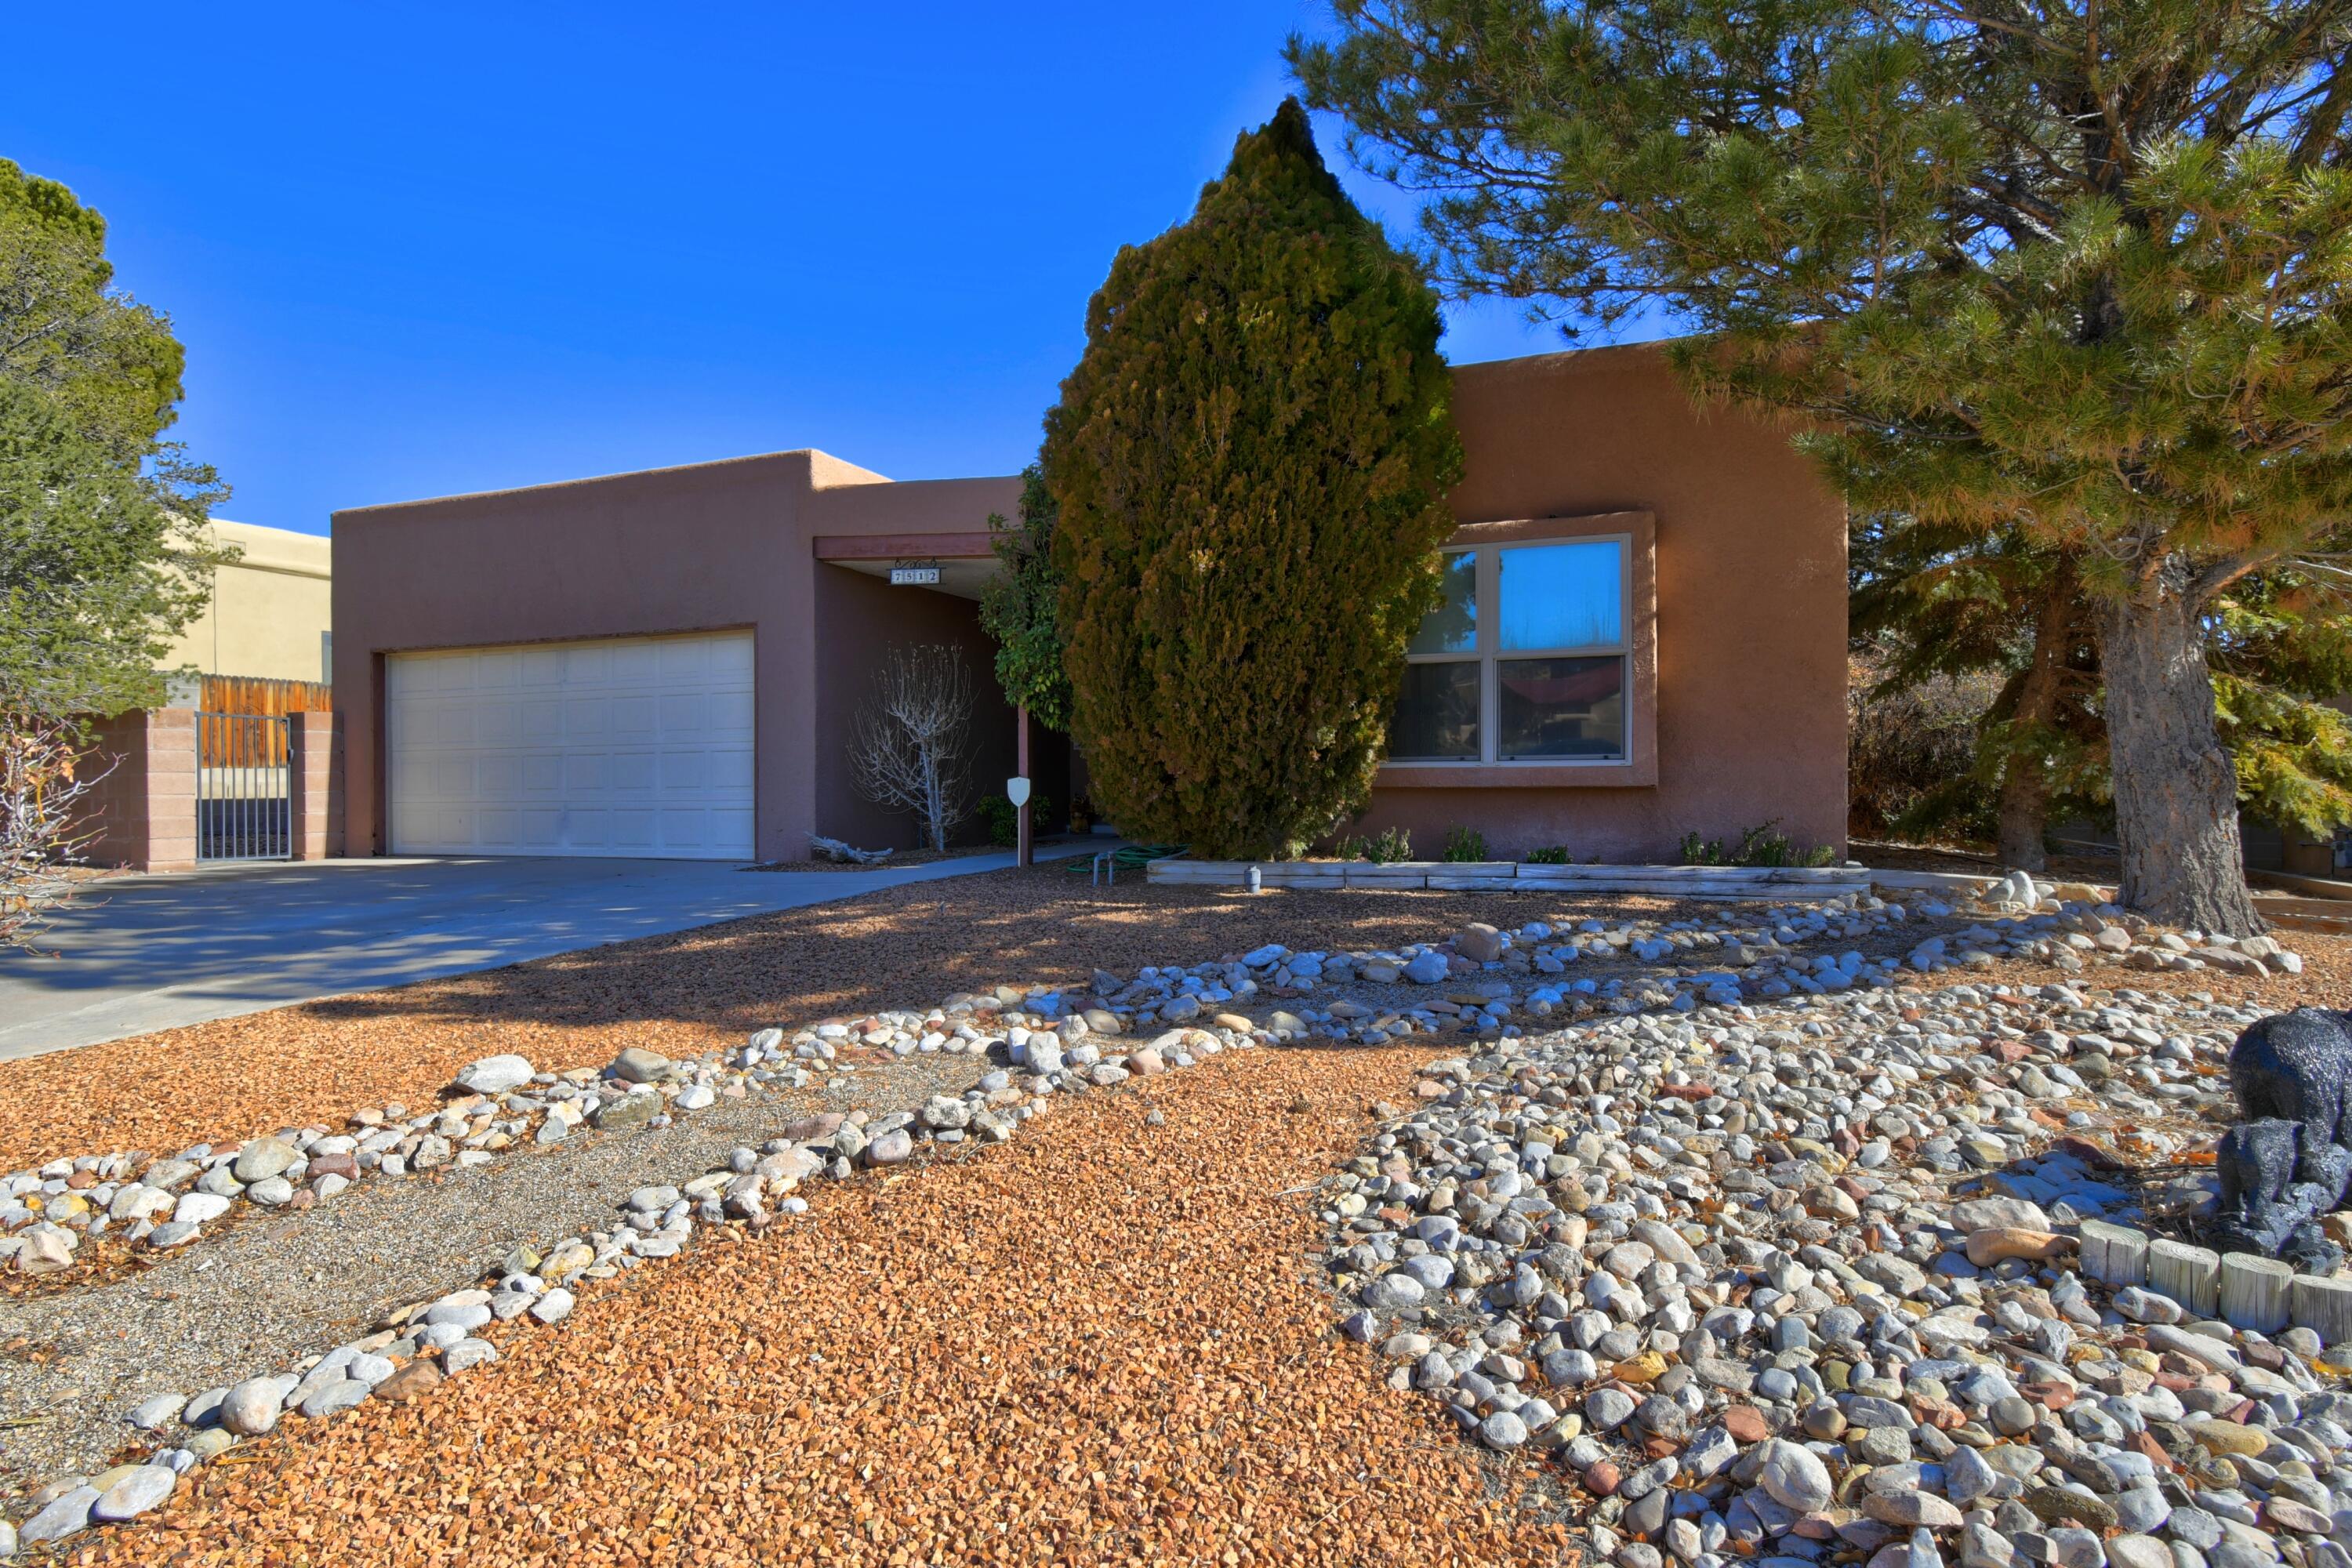 This charming single story, 3 bed, 2 bath home located in the high range at Taylor Ranch subdivision is walking distance to nearby schools and Petroglyph hiking trails. Enjoy the New Mexcio weather on the back covered patio in the beautifully landscaped backyard with gorgeous views of the Petroglyphs and Sandia mountains where you are guaranteed to see some New Mexico wildlife.  Water heater was replaced and refrigerated air was installed in 2022. This is the home you have been waiting for!